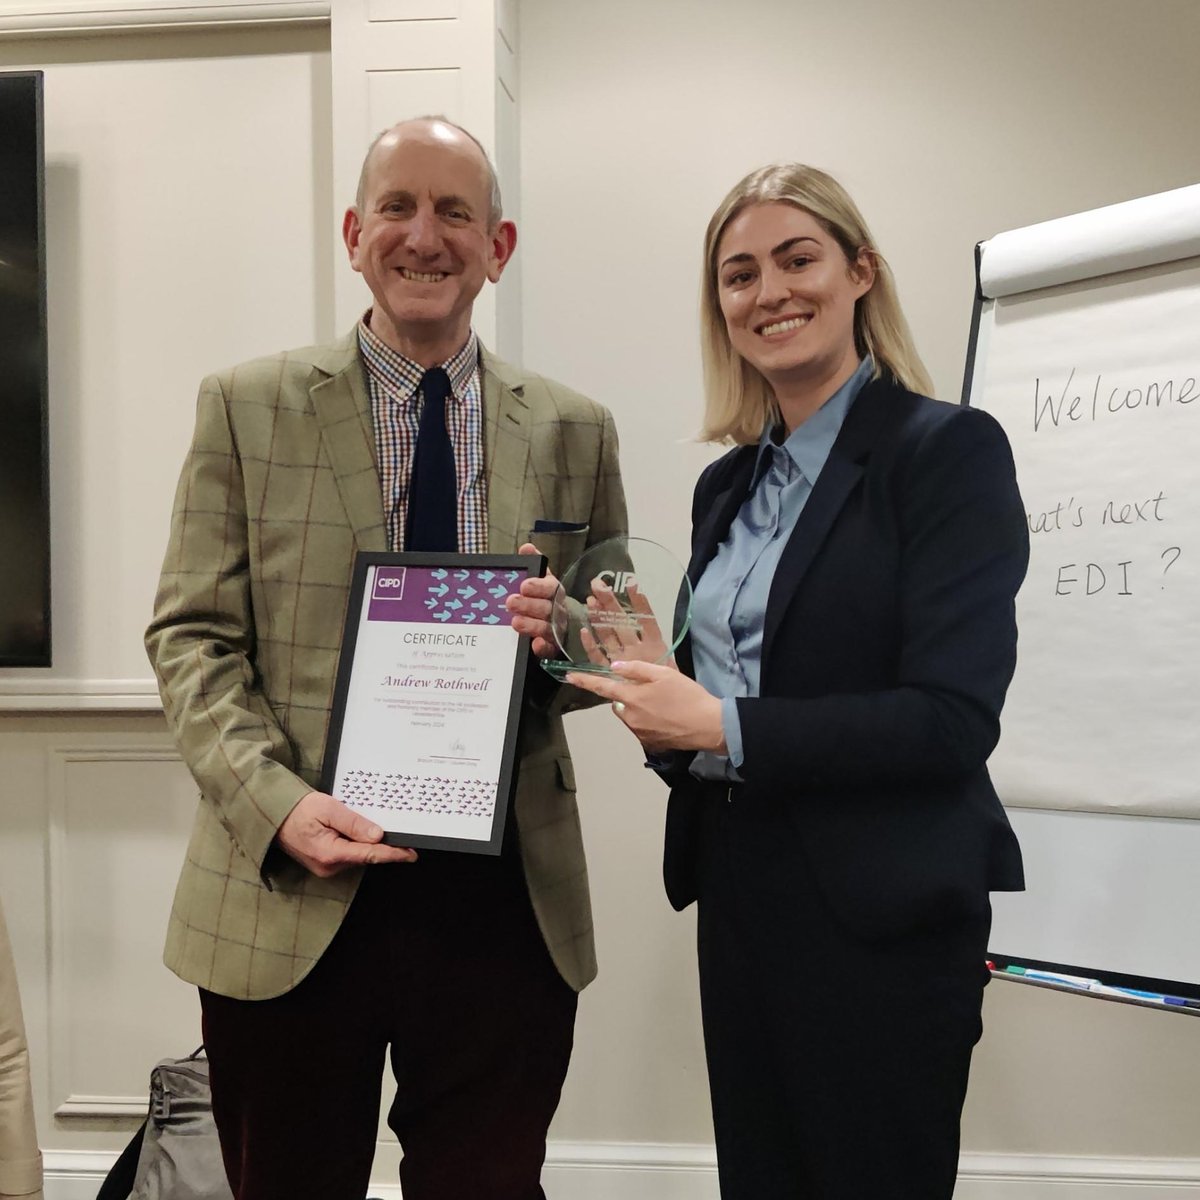 Colleagues from our Work and Organisation academic group recently attended a @CIPD event where our recently retired colleague Dr Andrew Rothwell was awarded for his contributions to the HR profession 🌟 Congratulations Andrew! 👏